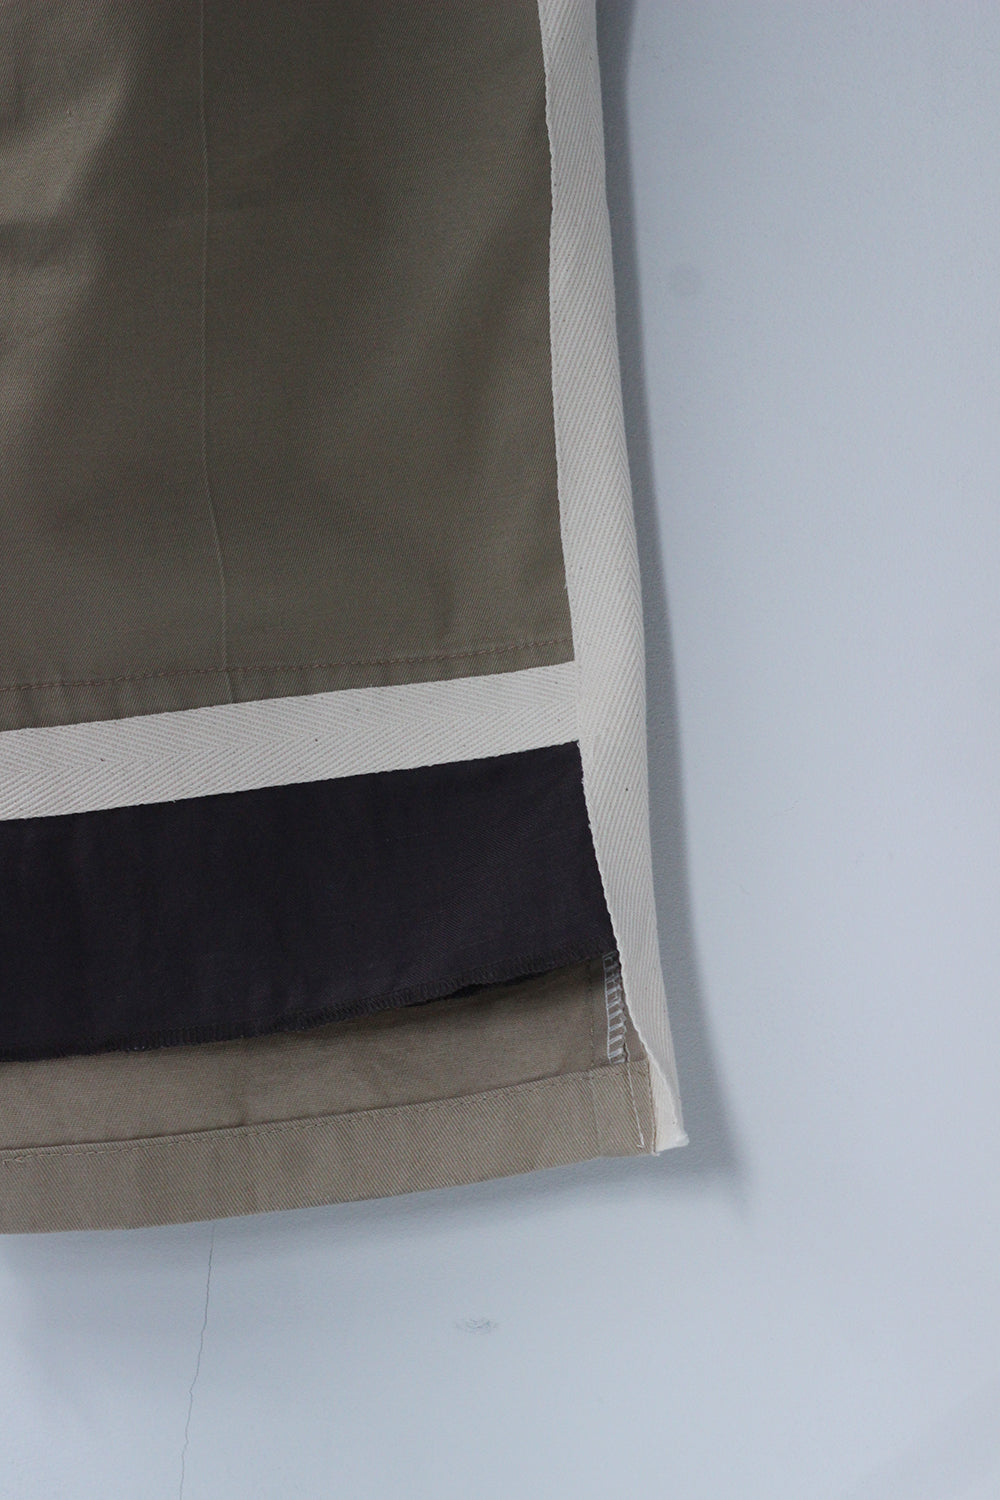 Rebuild by Needles "Chino Pant -> Covered Pant" (charcoal) 1